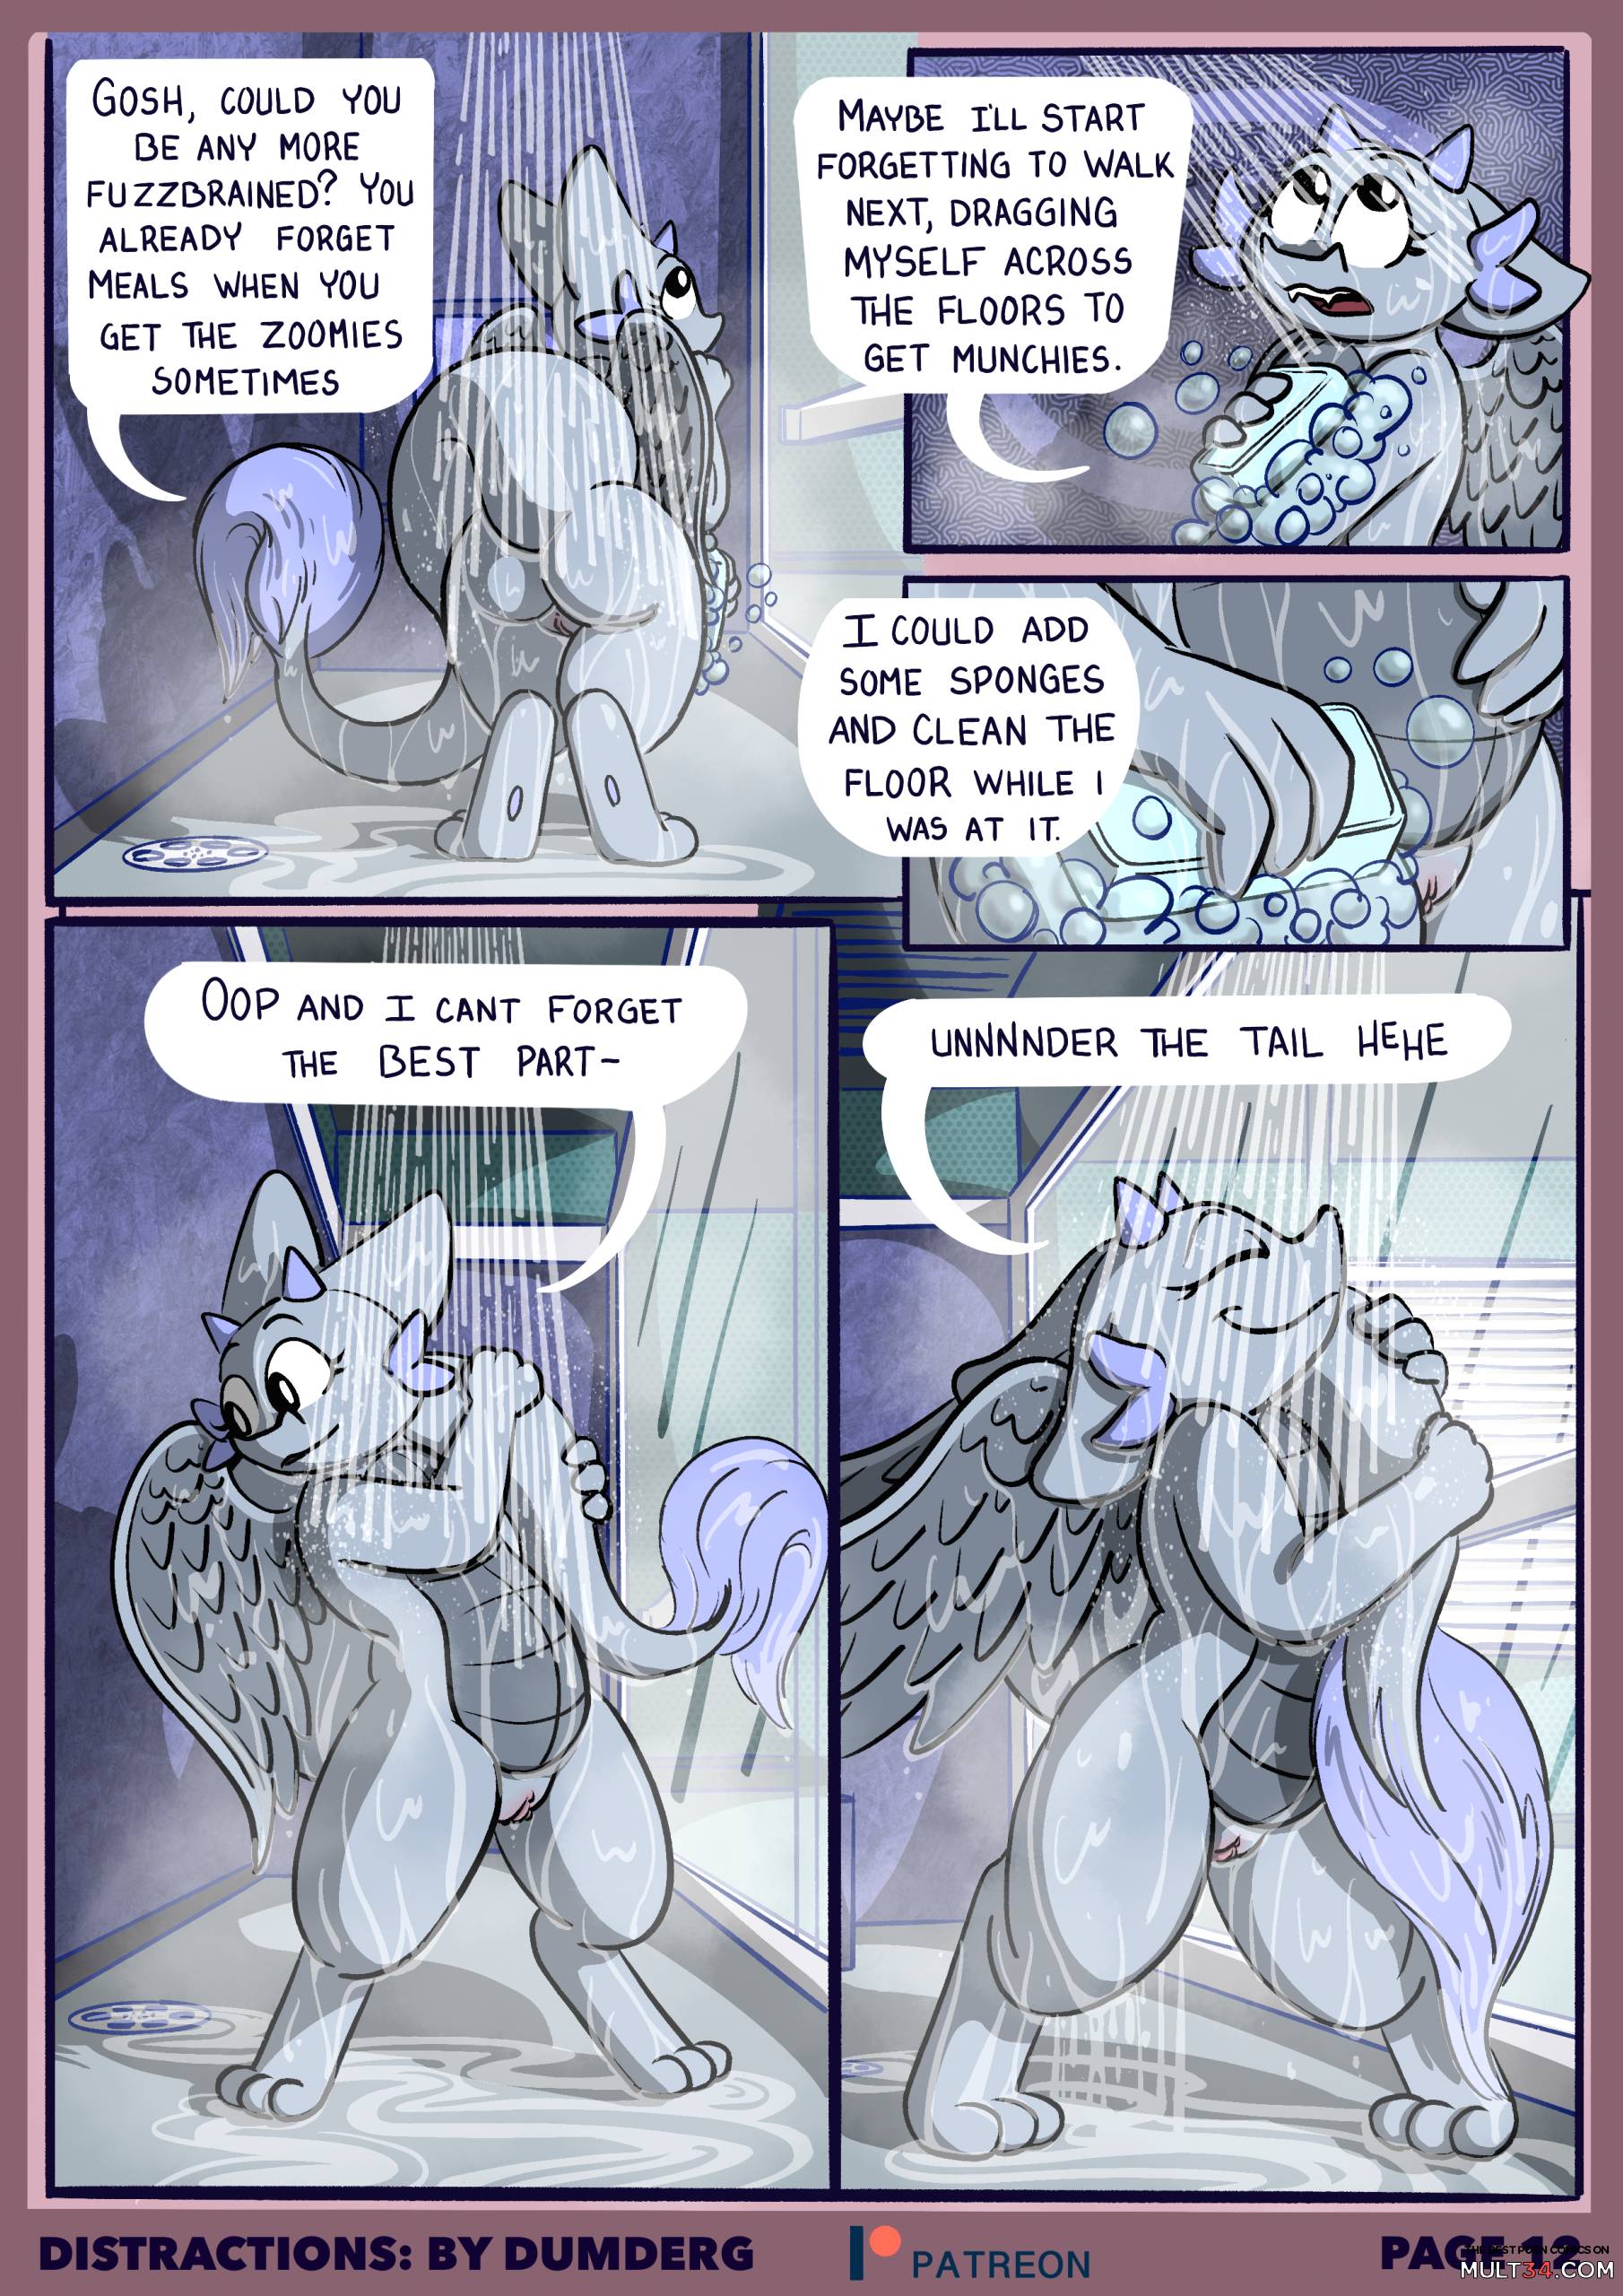 Distractions - DumDerg page 13